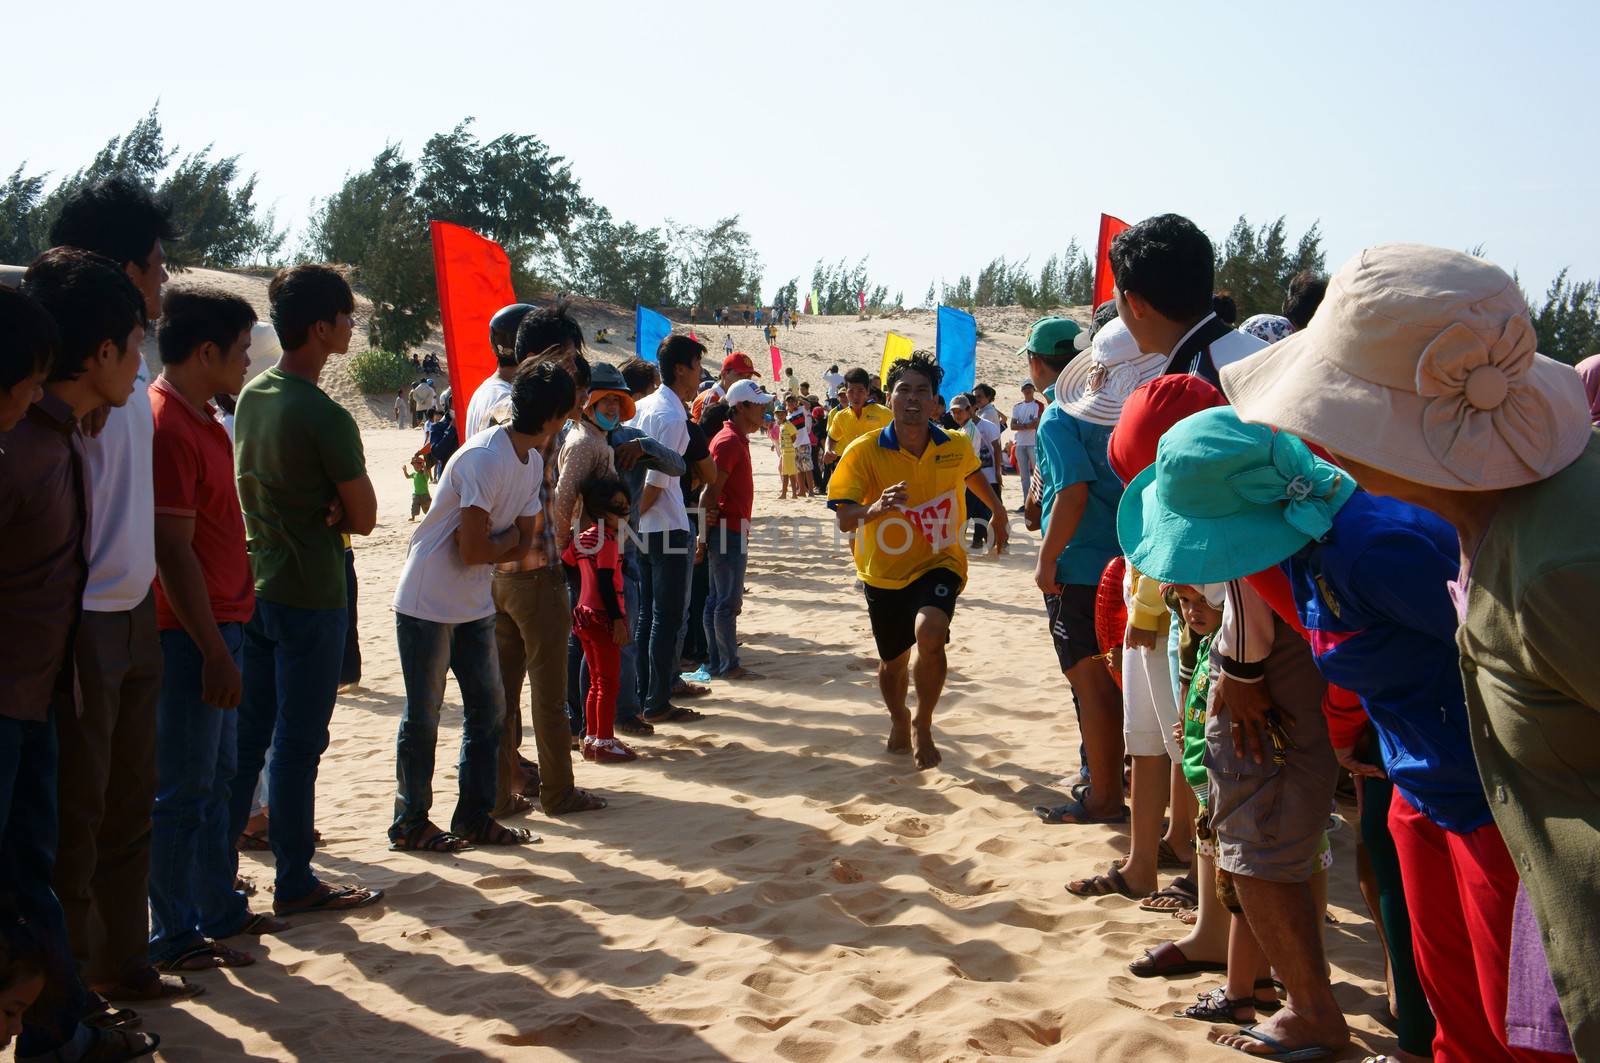 BINH THUAN, VIETNAM- FEB 14: Runner finish in marathon cross sand hill race, supporter standing in row to encourage, this's public sport activity to cheer healthy lifestyle, Viet Nam, Feb 14, 2014